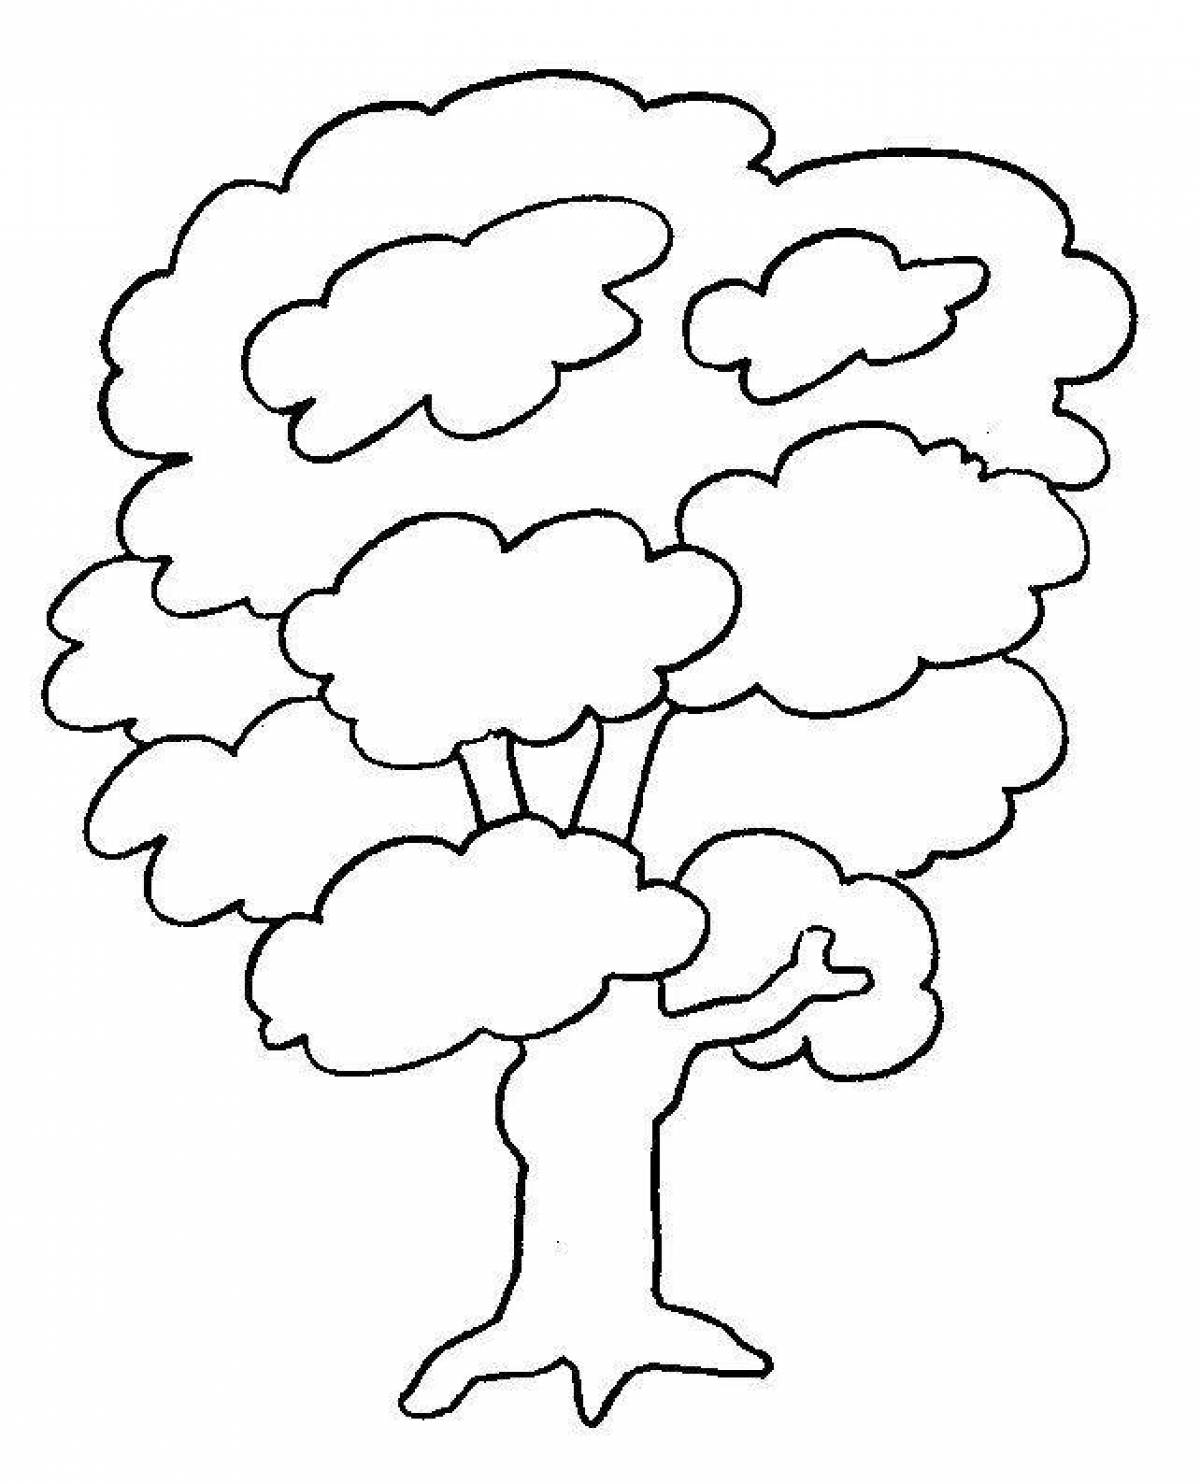 Exquisite tree pattern coloring page